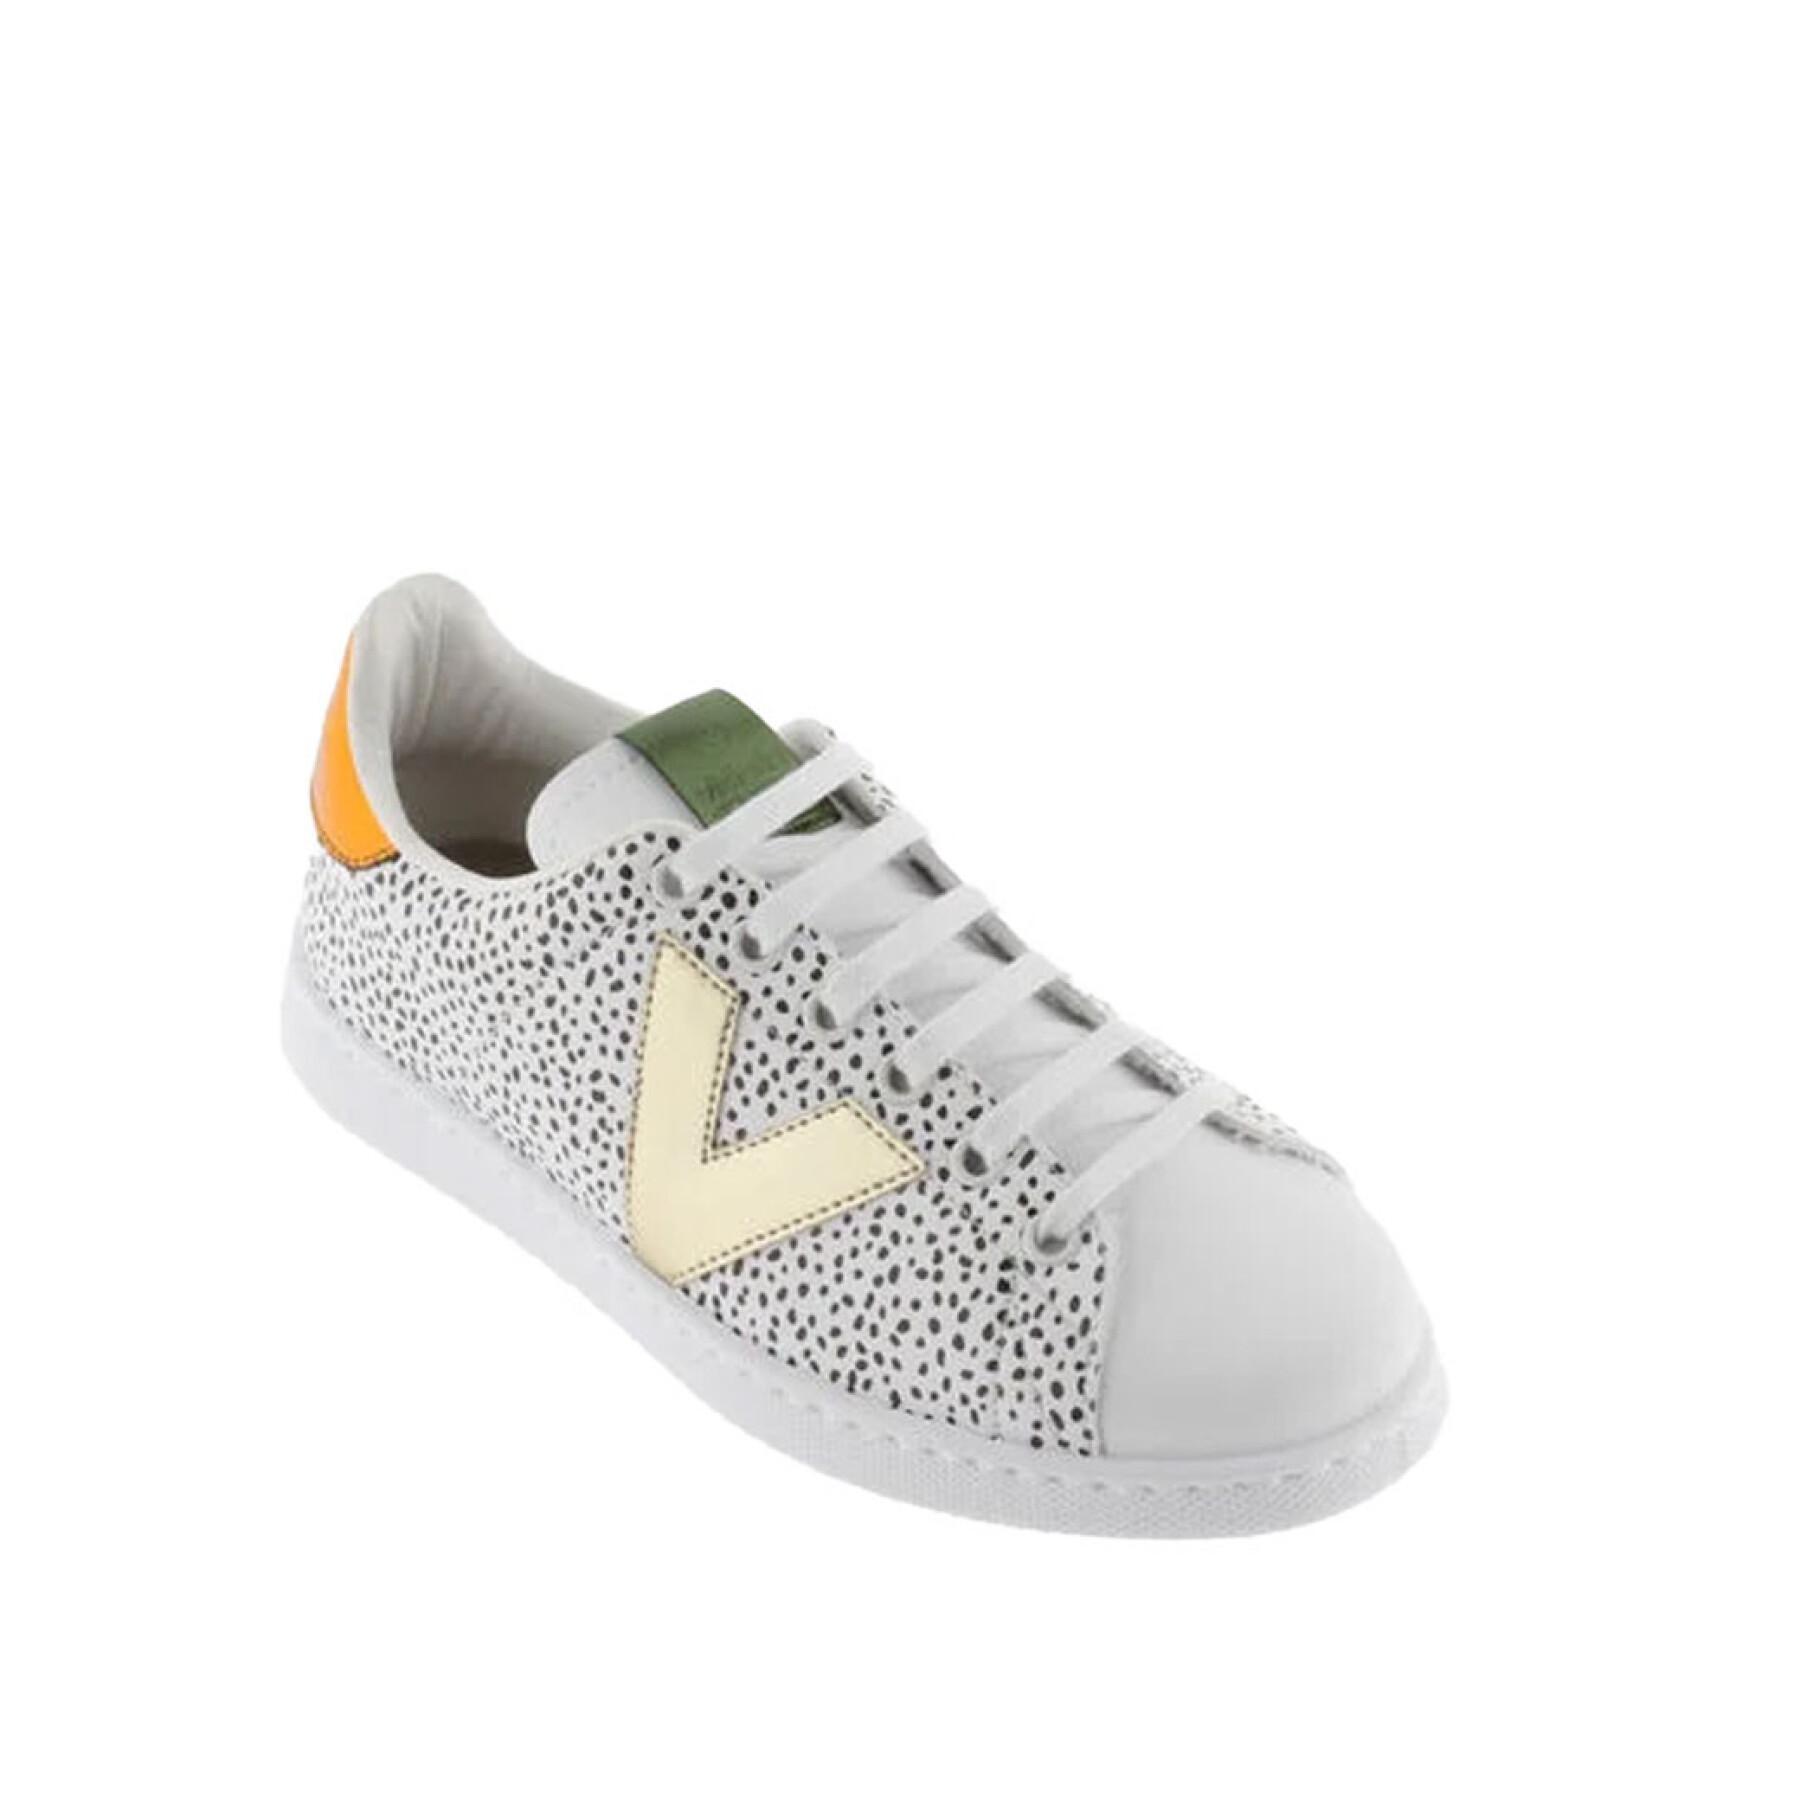 Animal print leather effect sneakers for women Victoria